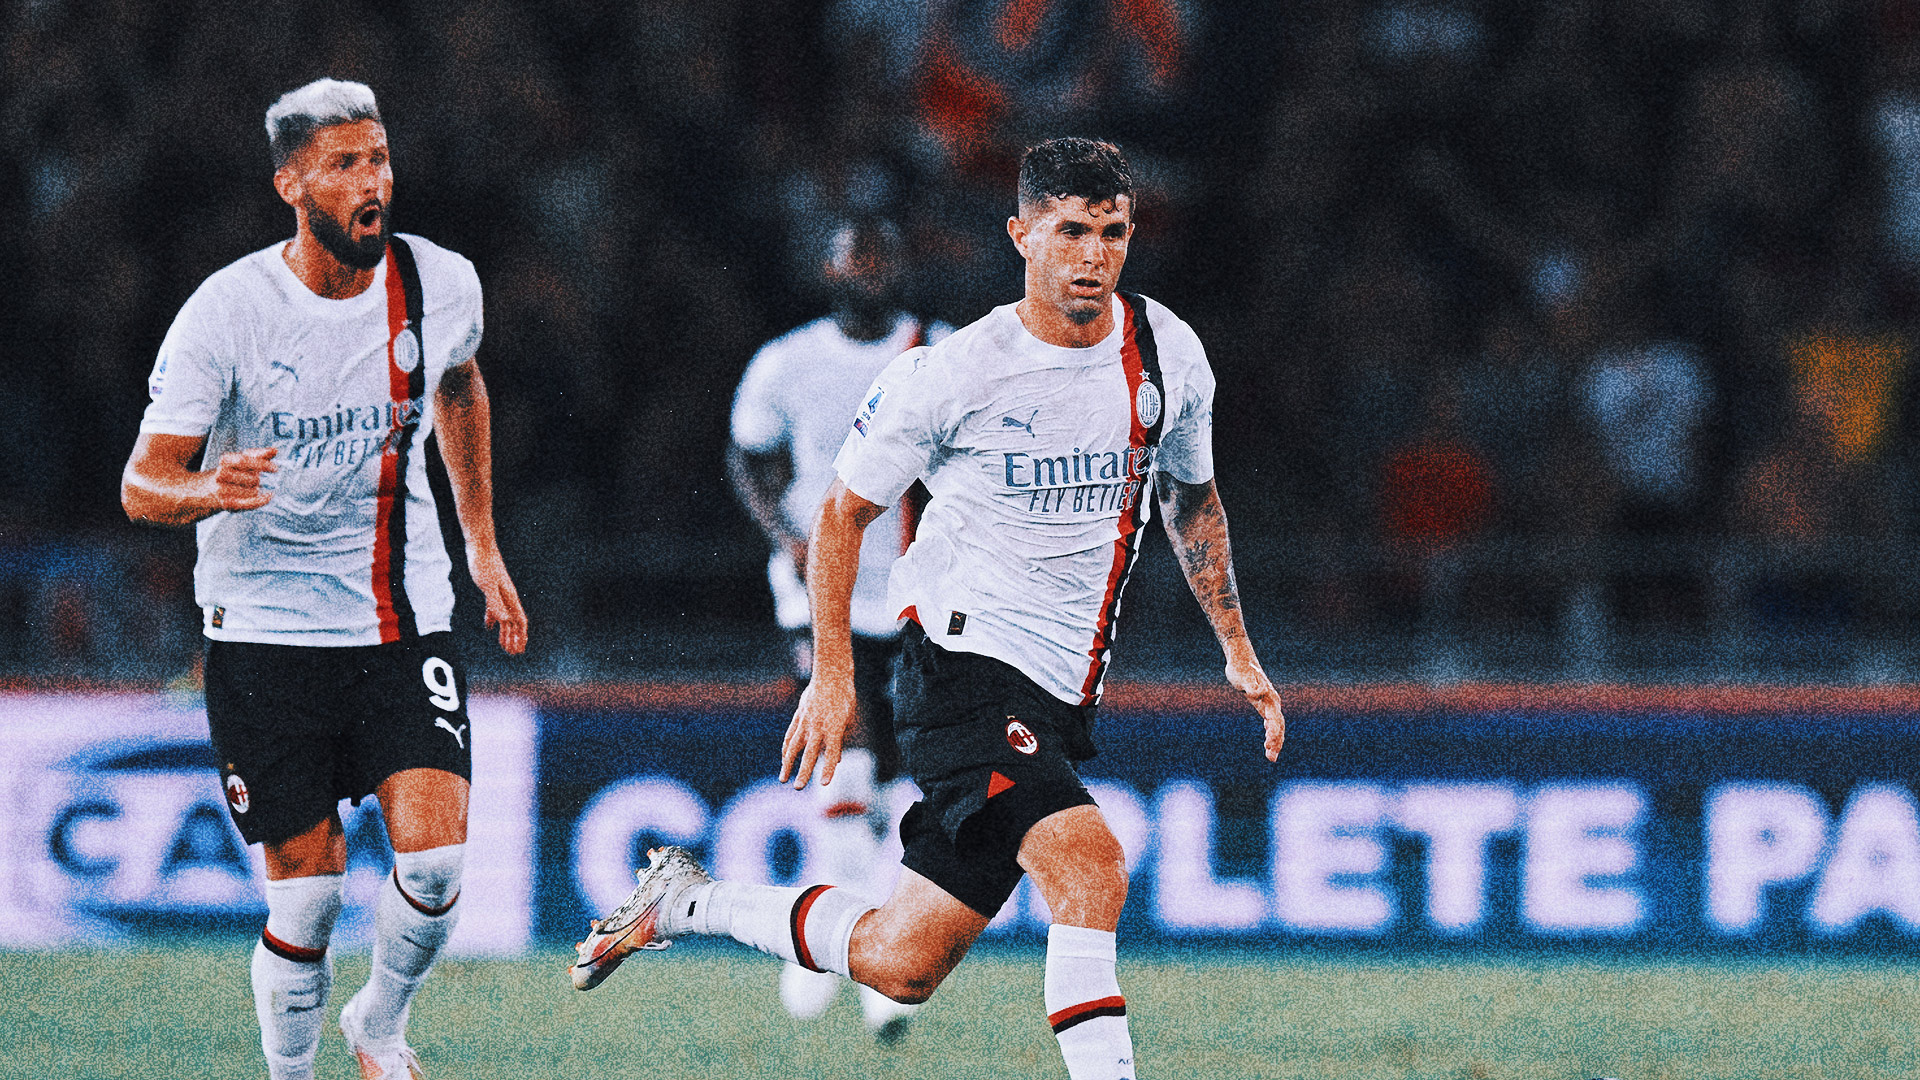 Christian Pulisic stars in Serie A debut with stunning goal to help Milan win